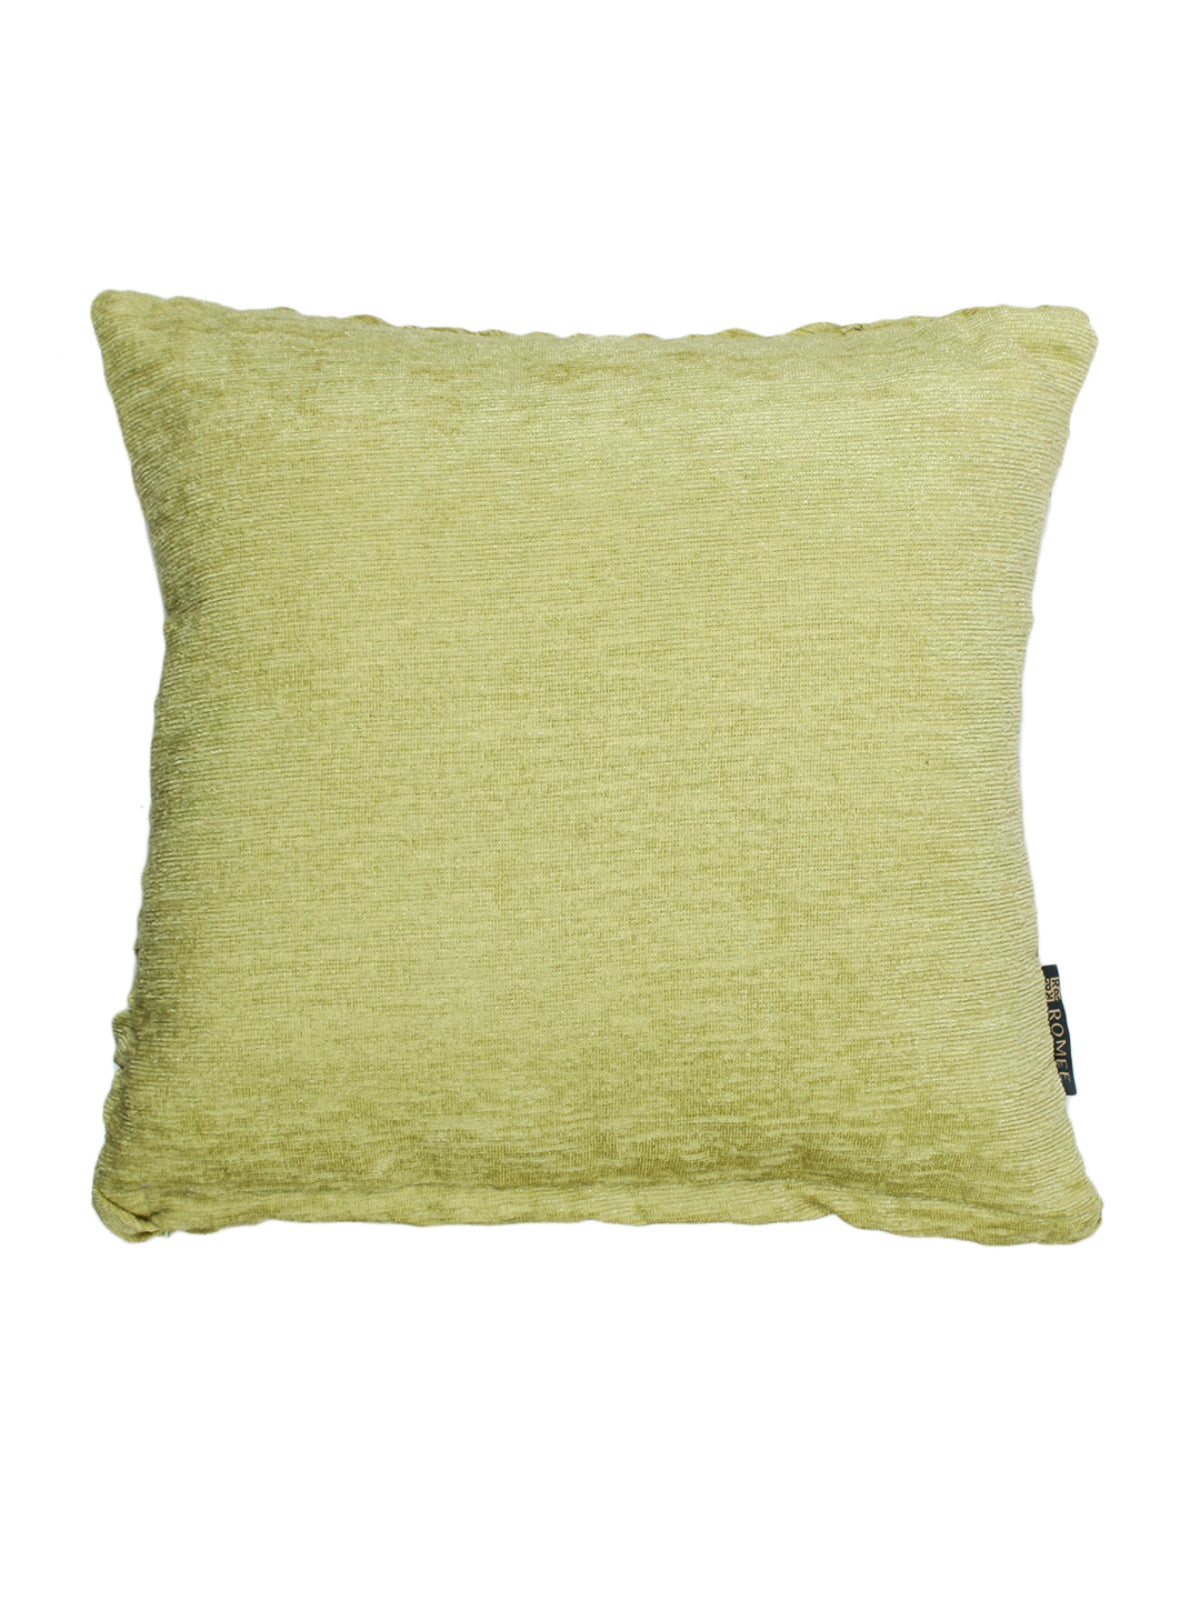 Soft Polyester Chenille Designer Plain Cushion Covers 16 inch x 16 inch Set of 3 - Green